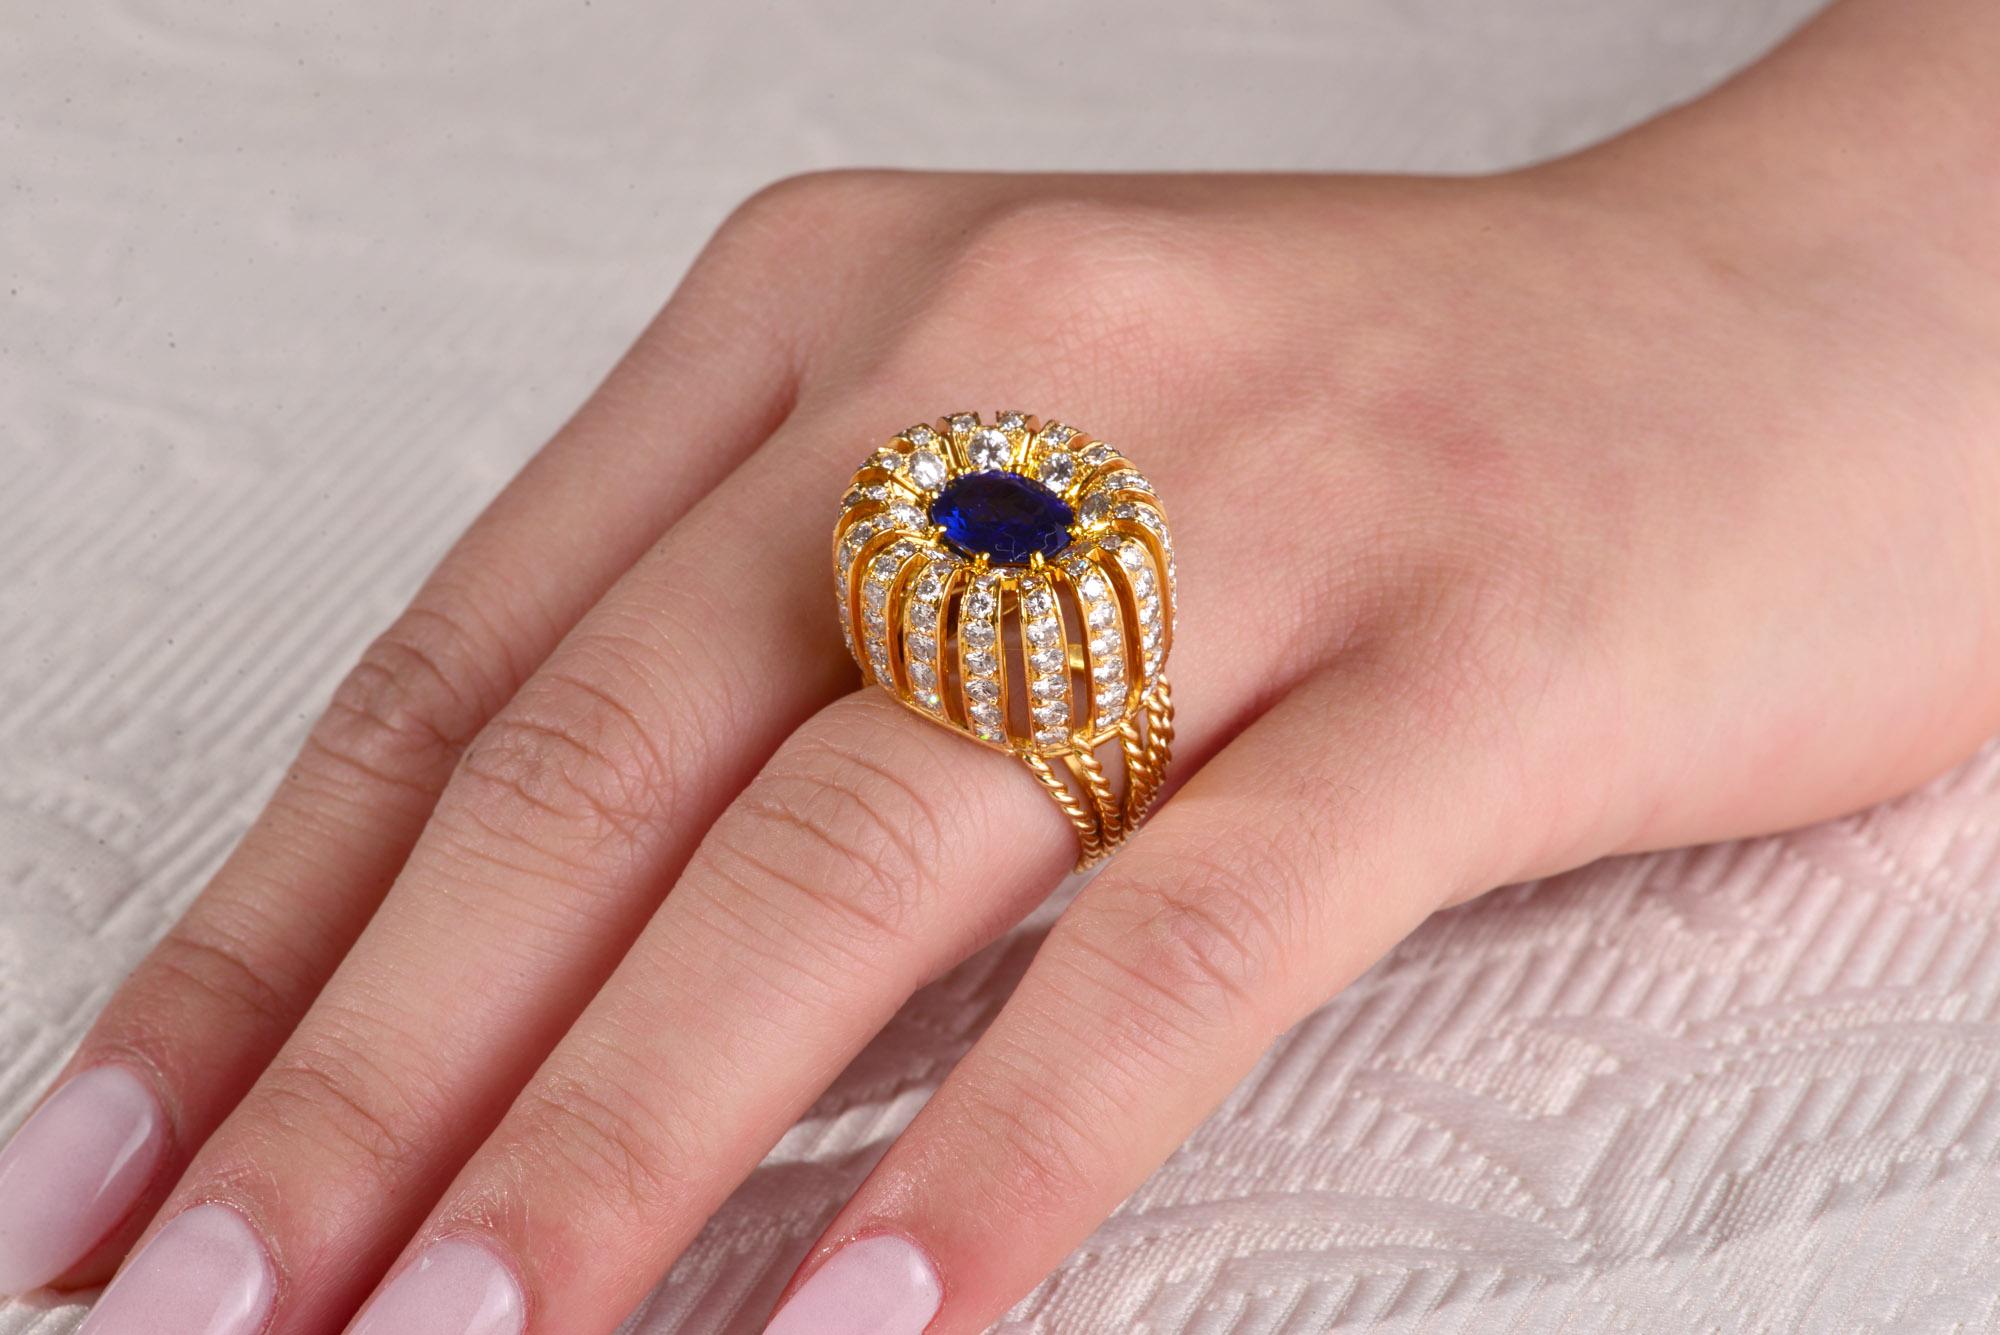  Extraordinary 18 carat Yellow Gold , Diamond and Sapphire handmade ring of the early 1950s s .This Bombe shaped ring is set to the centre with a Royal blue sapphire of an estimated weight of 2.10 cts with cascading sides in six sections each set